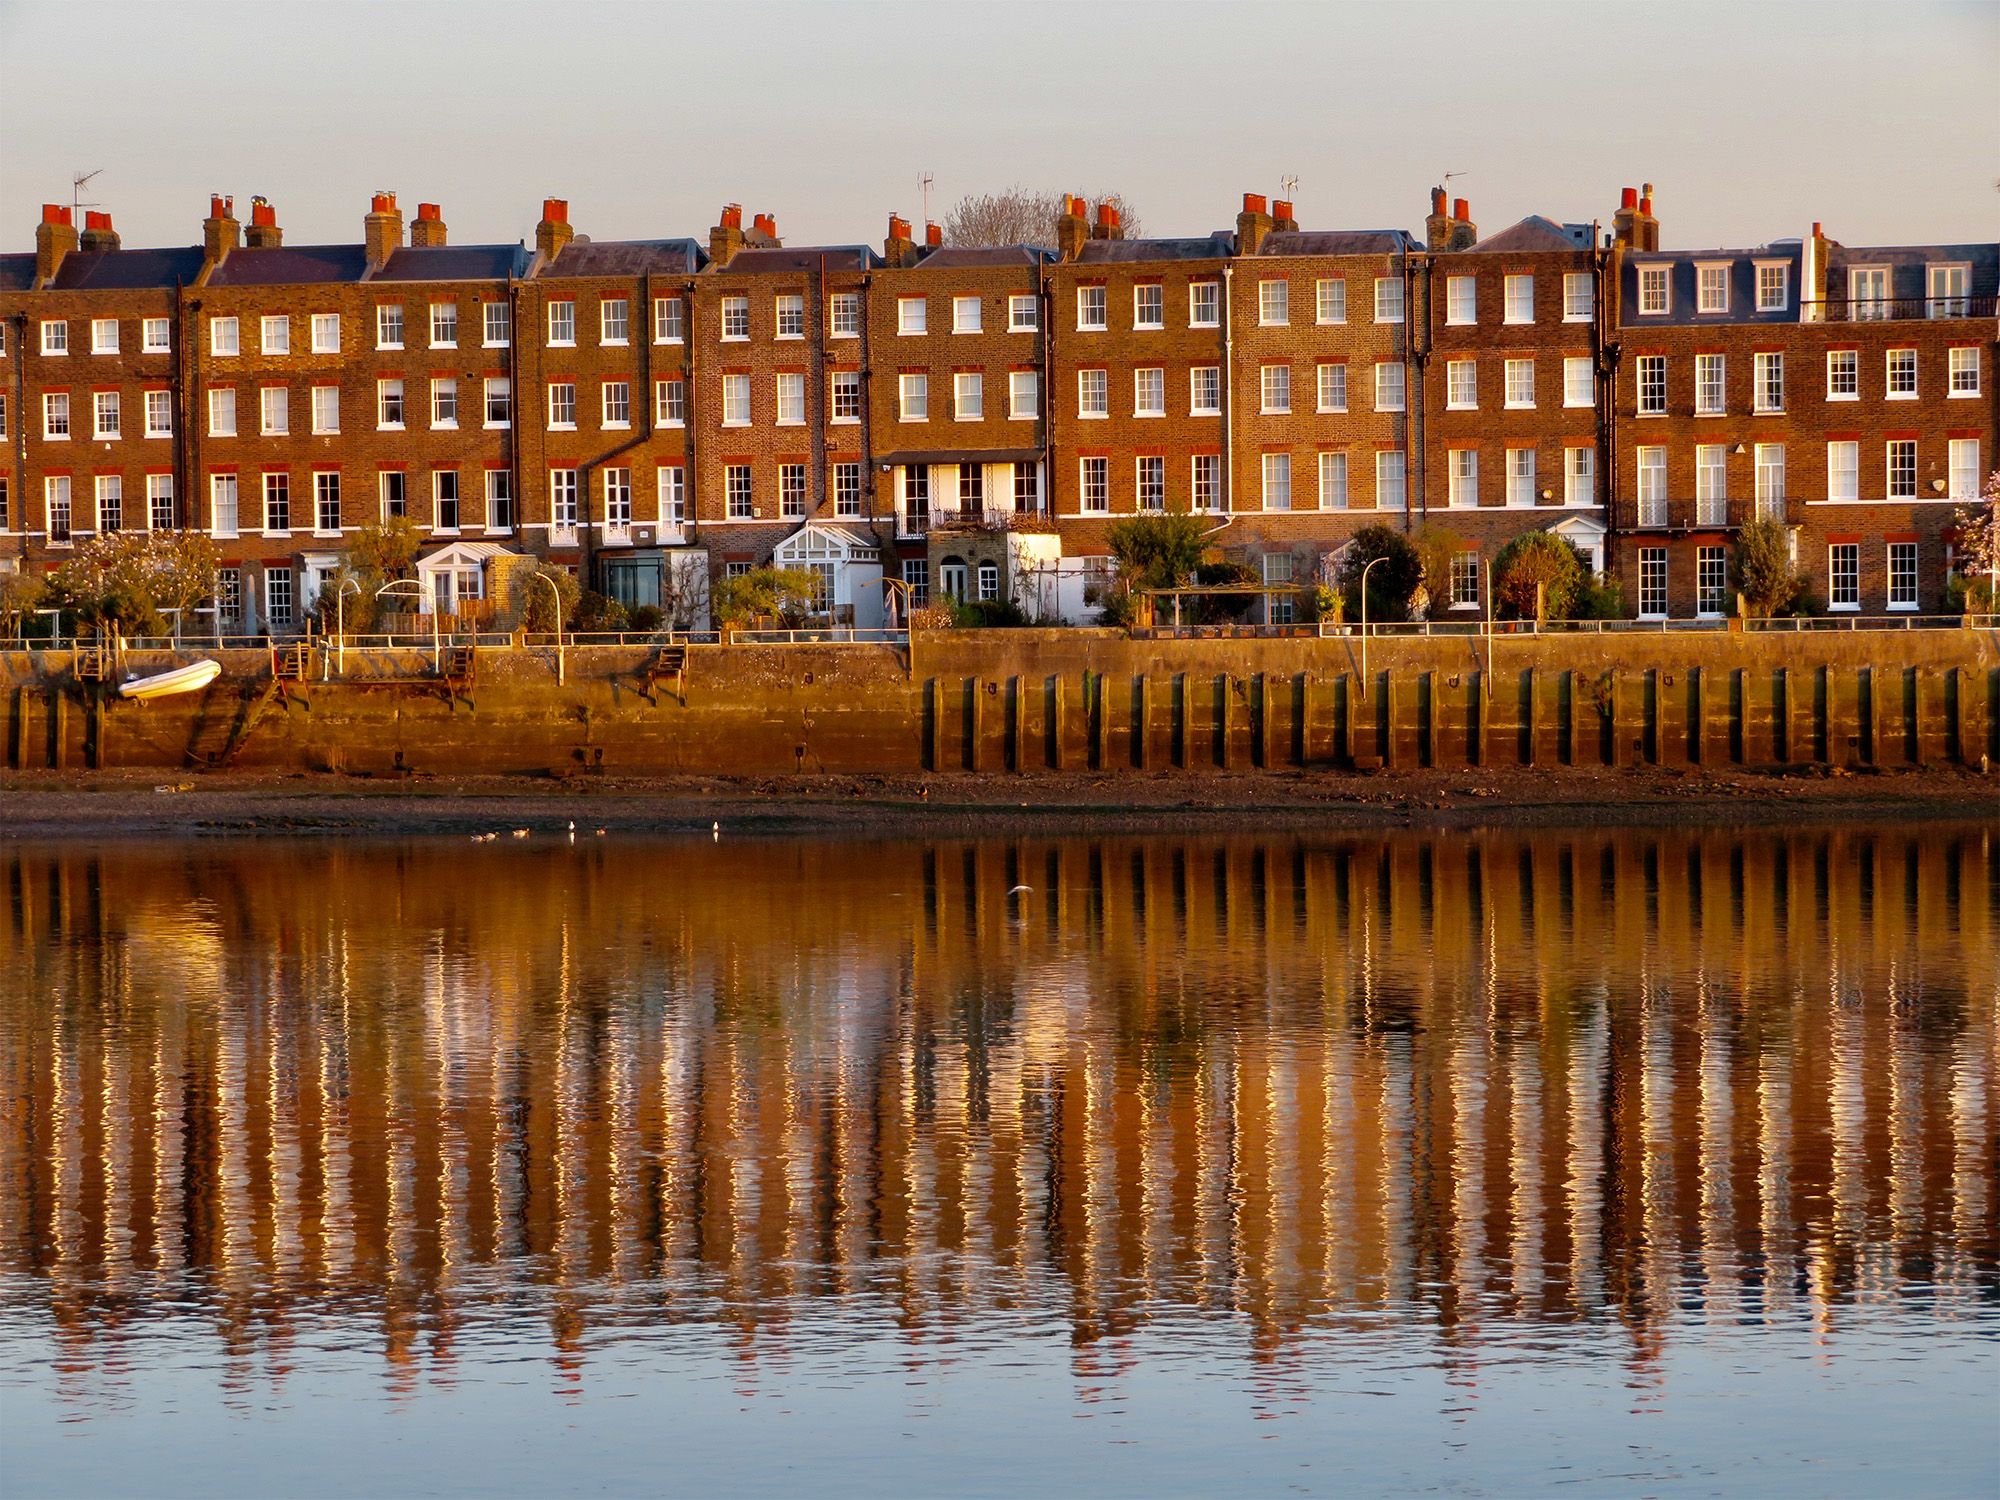 Row of terraced housing reflected in the river